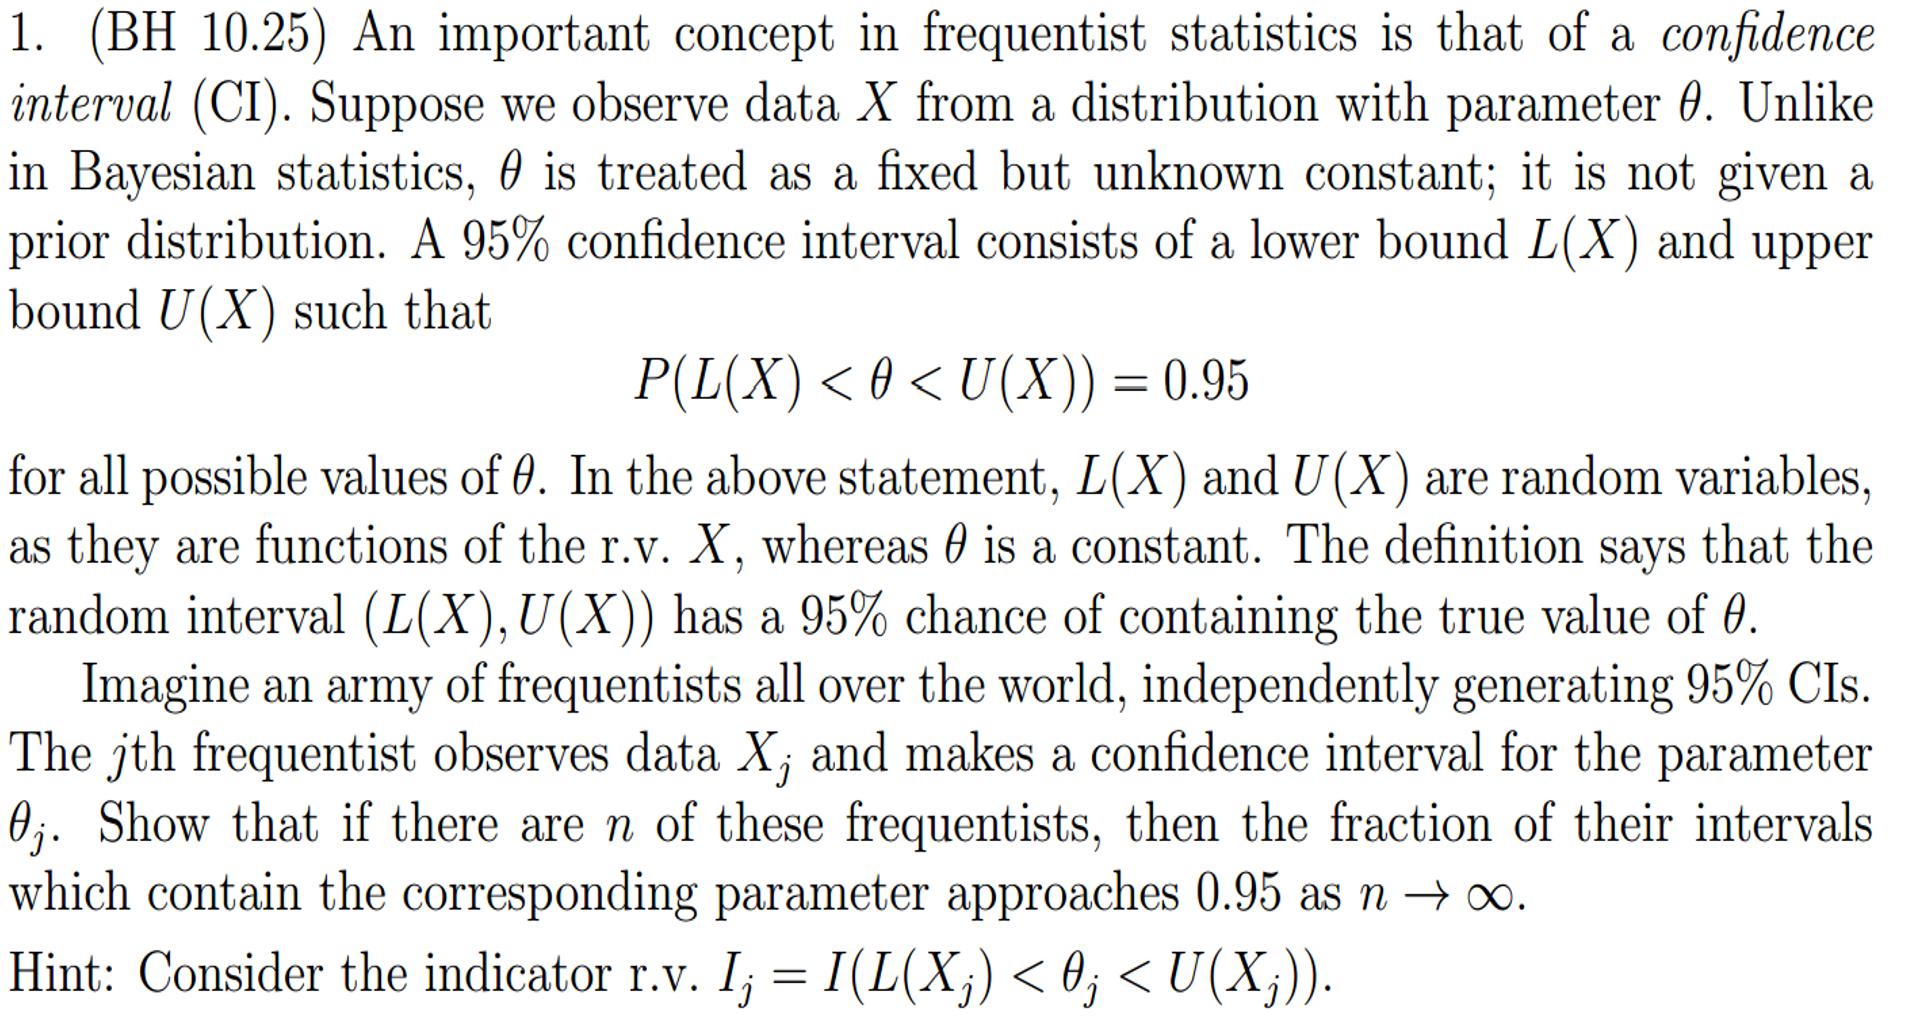 An important concept in frequentist statistics is